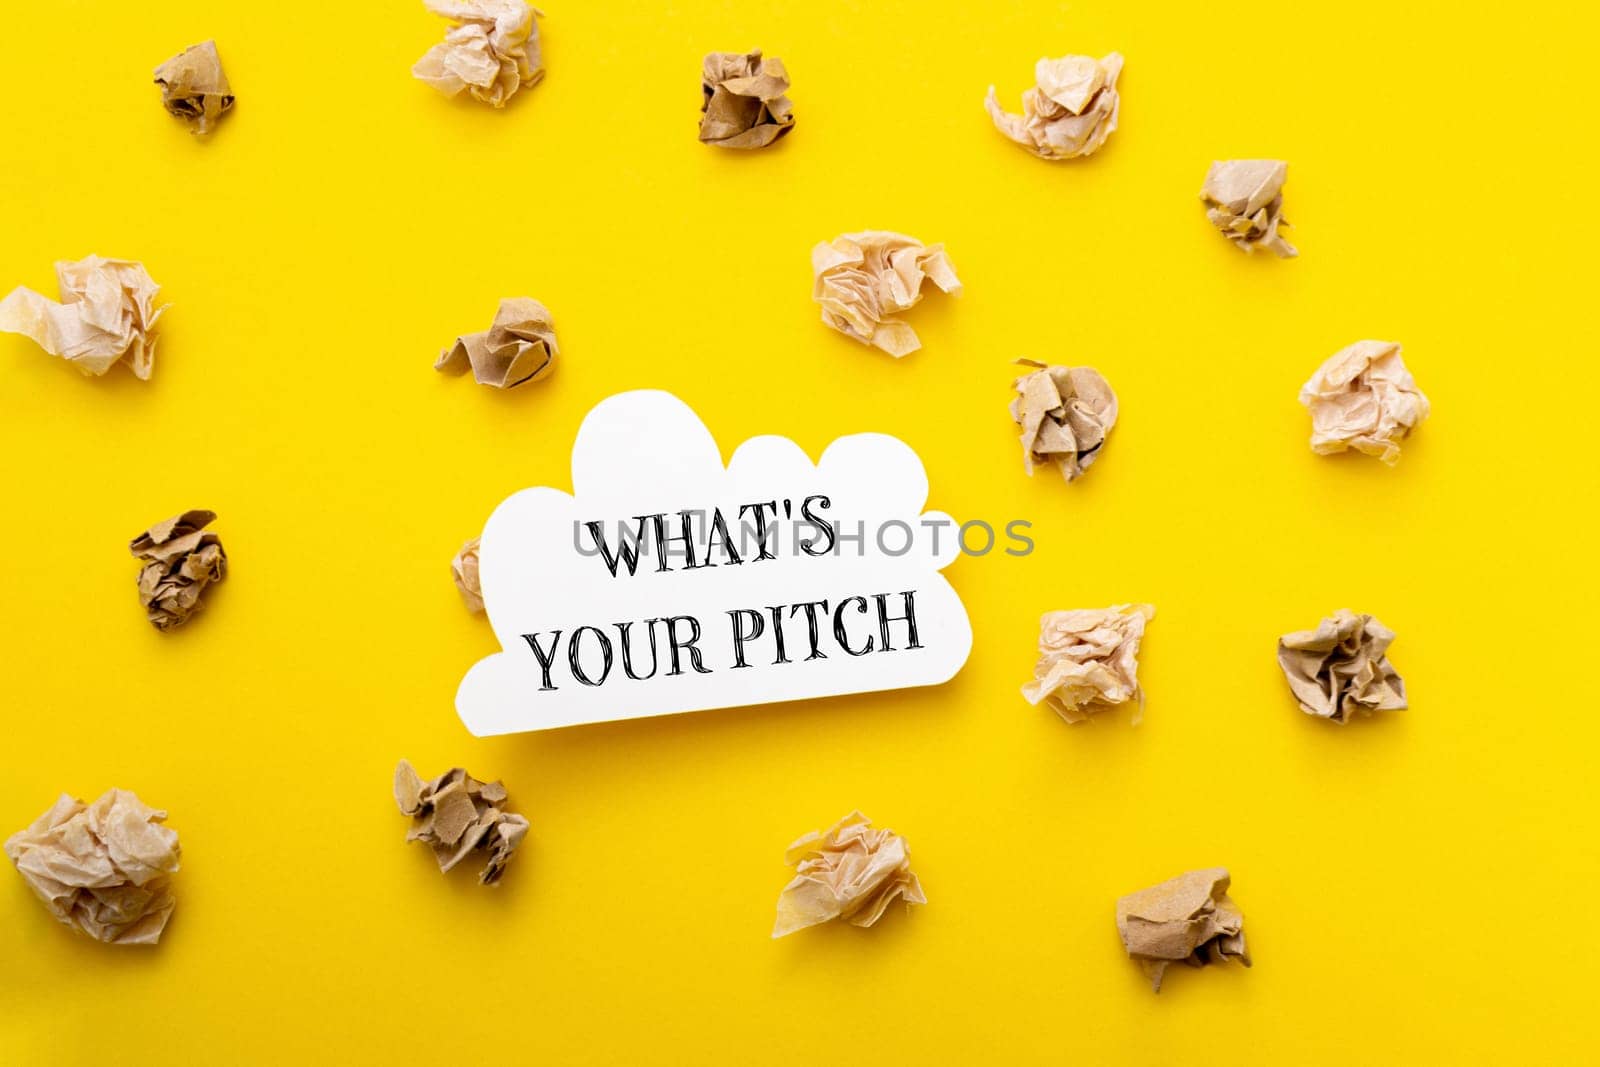 A yellow background with a white cloud and the words What's your pitch written on it